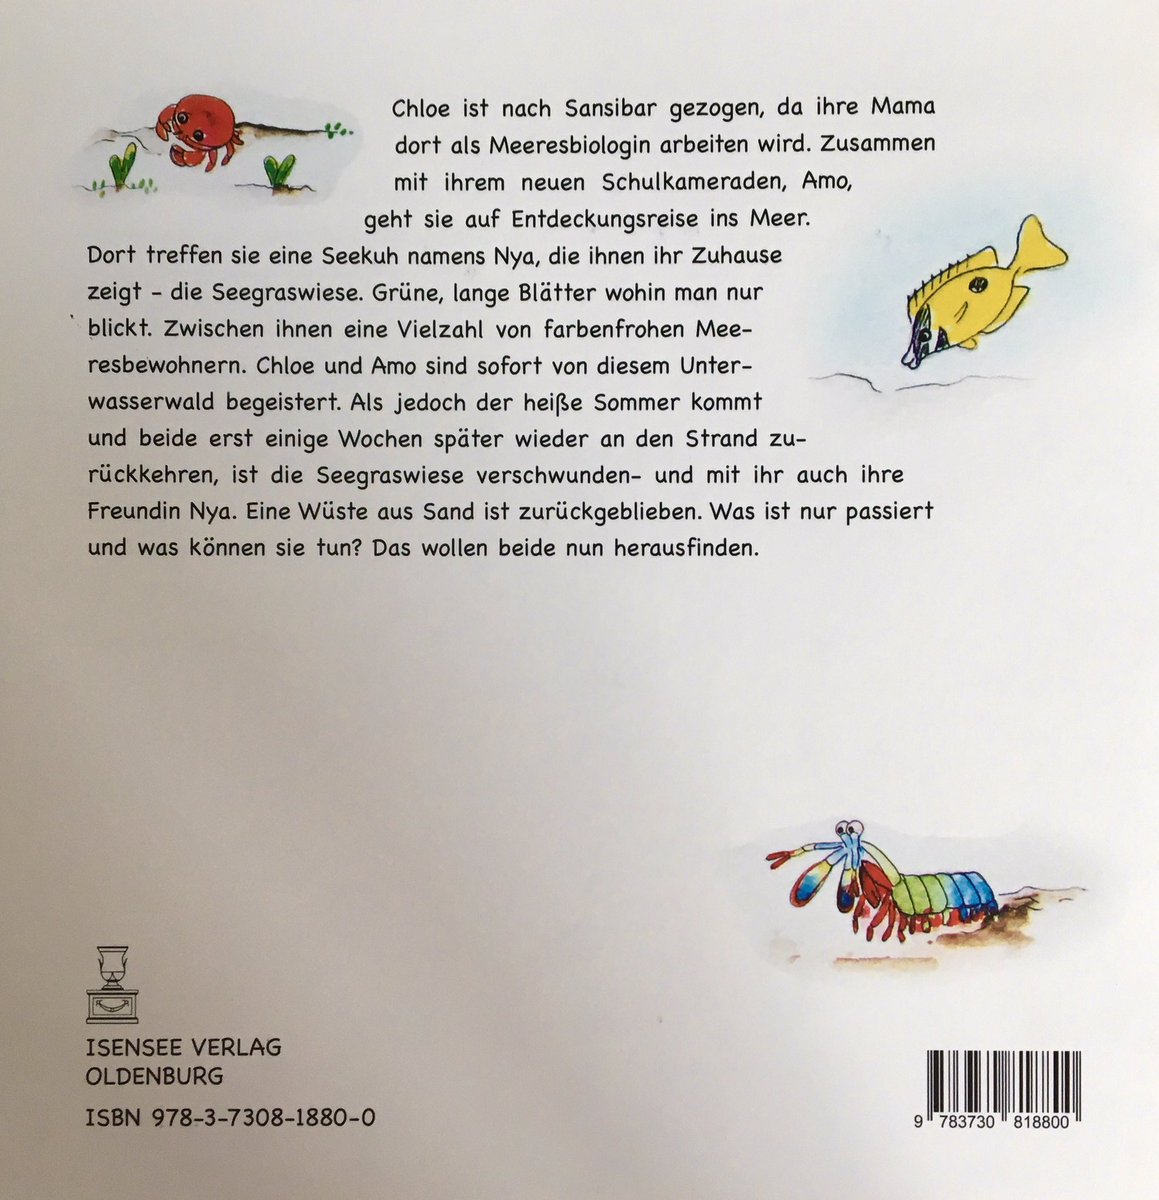 I am so excited…finally, our children’s book illustrated by @paula_senff and written by me is published by Isensee Verlag in English and in German with support of @ICBM_uol and available online and in bookshops.  
#seagrass #ChildrensBooks #seagrassrestoration #picturebook